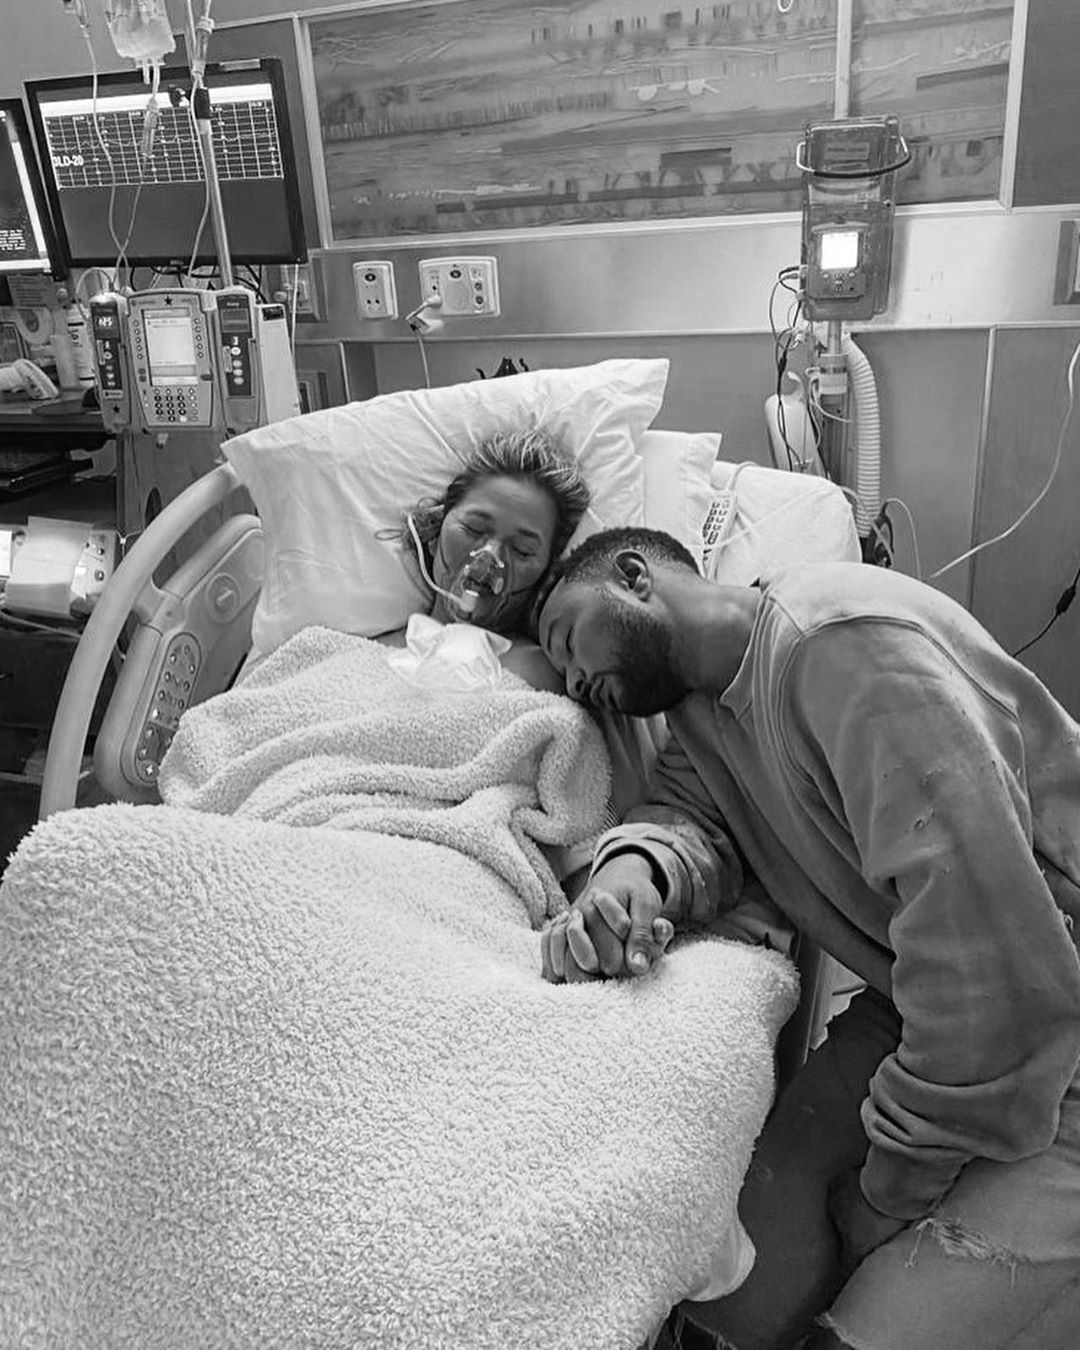 John Legend and wife, Chrissy Teigen, mourn as they lose newborn son moment after birth